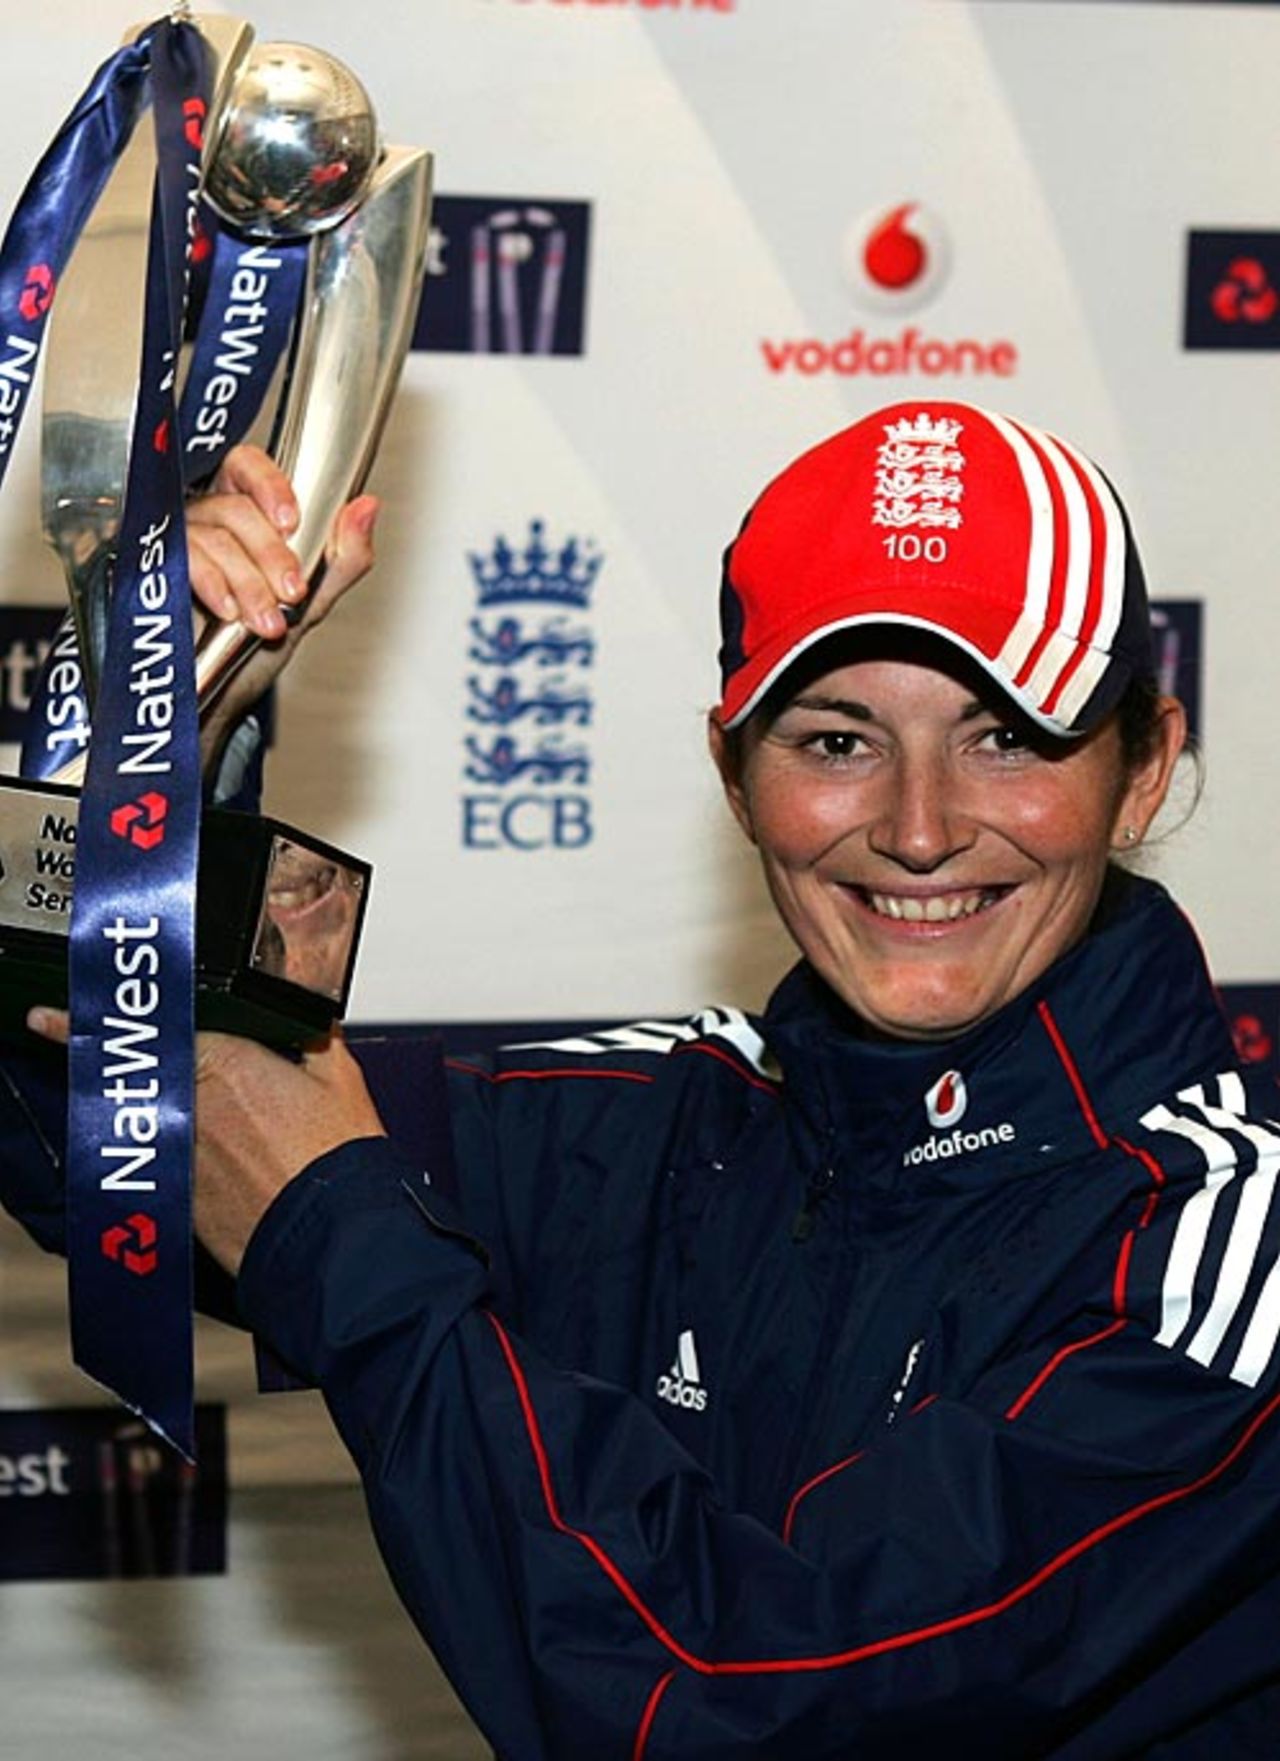 England captain Charlotte Edwards poses with NatWest trophy after winning the five-match ODI series against India 4-0, England v India, 5th women's ODI, Hove, September 9, 2008